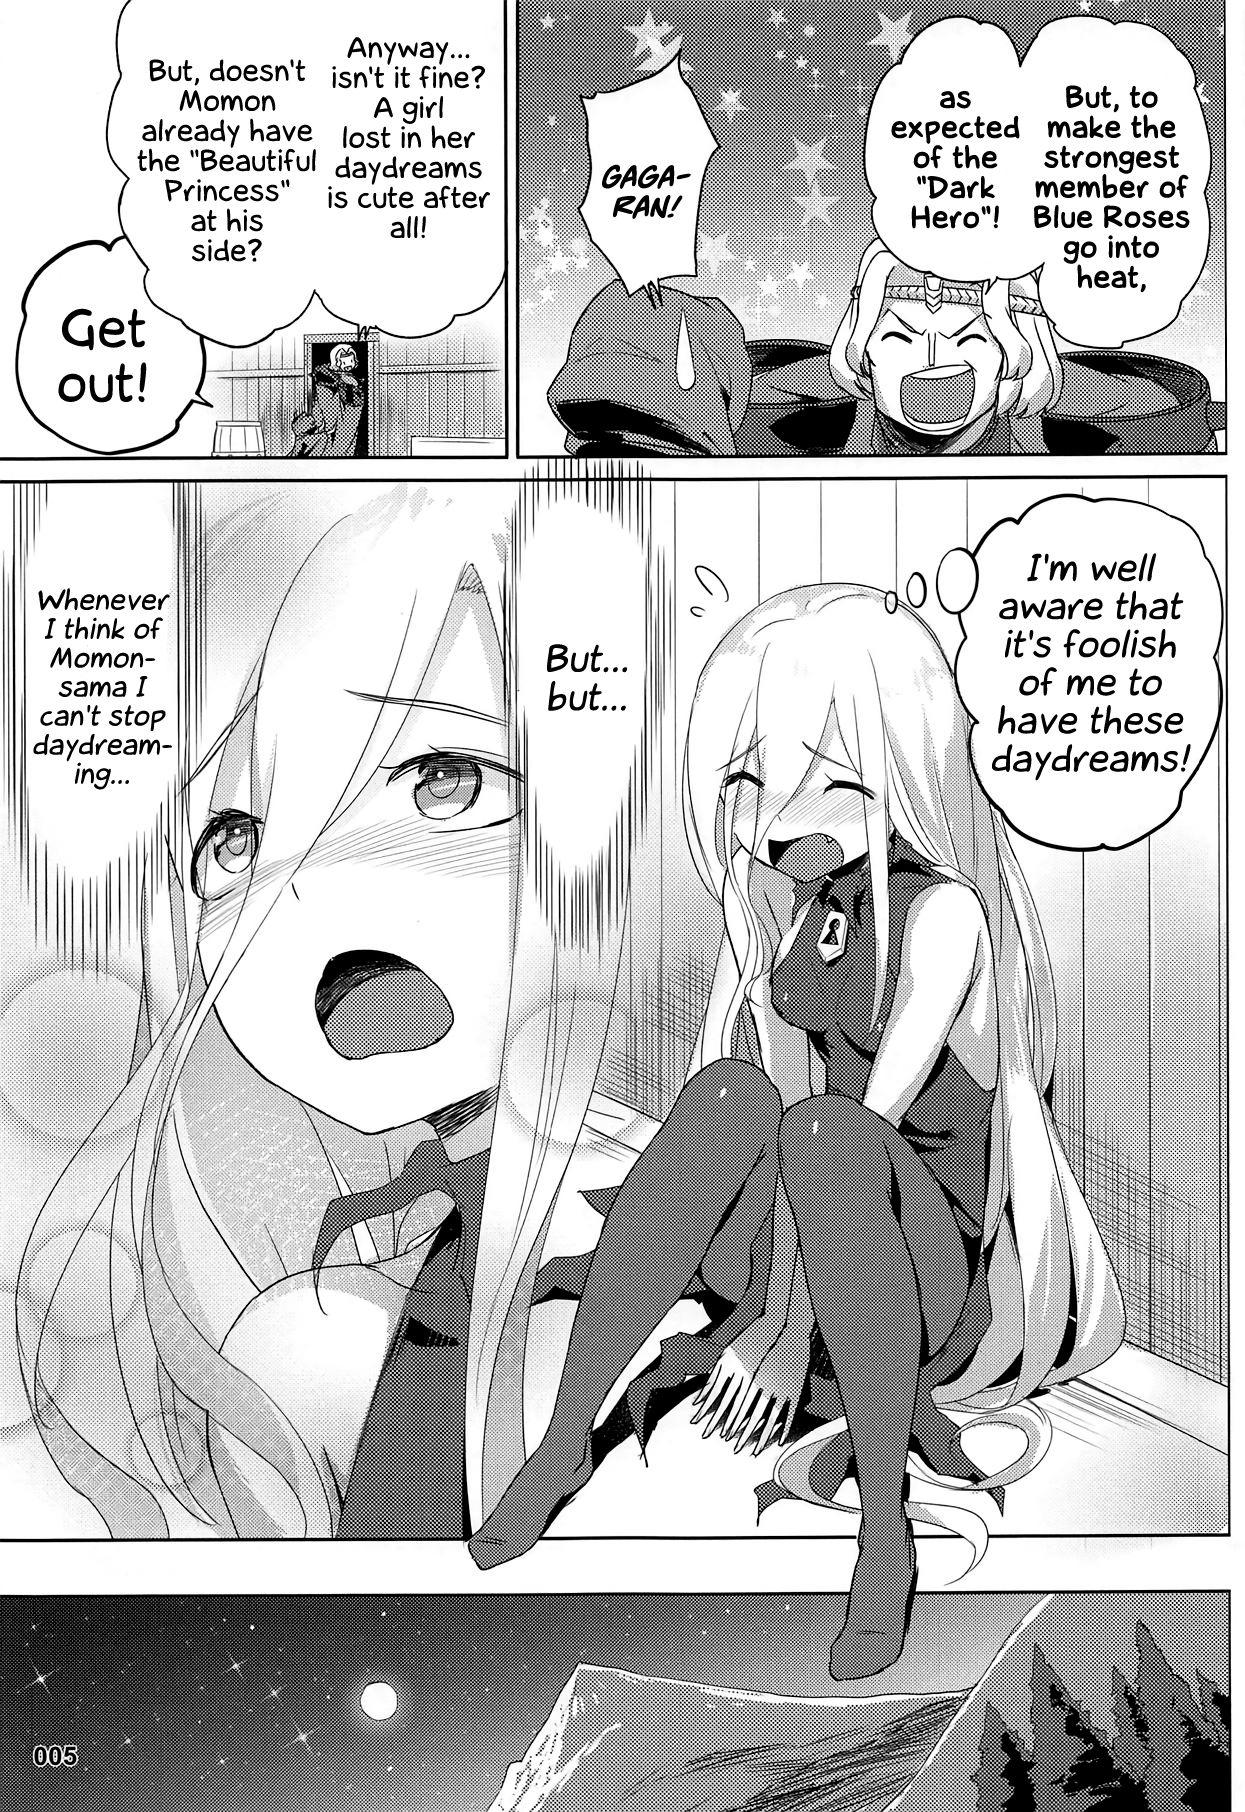 Bulge Evileye no Mousou Sex | Evileye's Daydream Sex - Overlord Face - Page 6